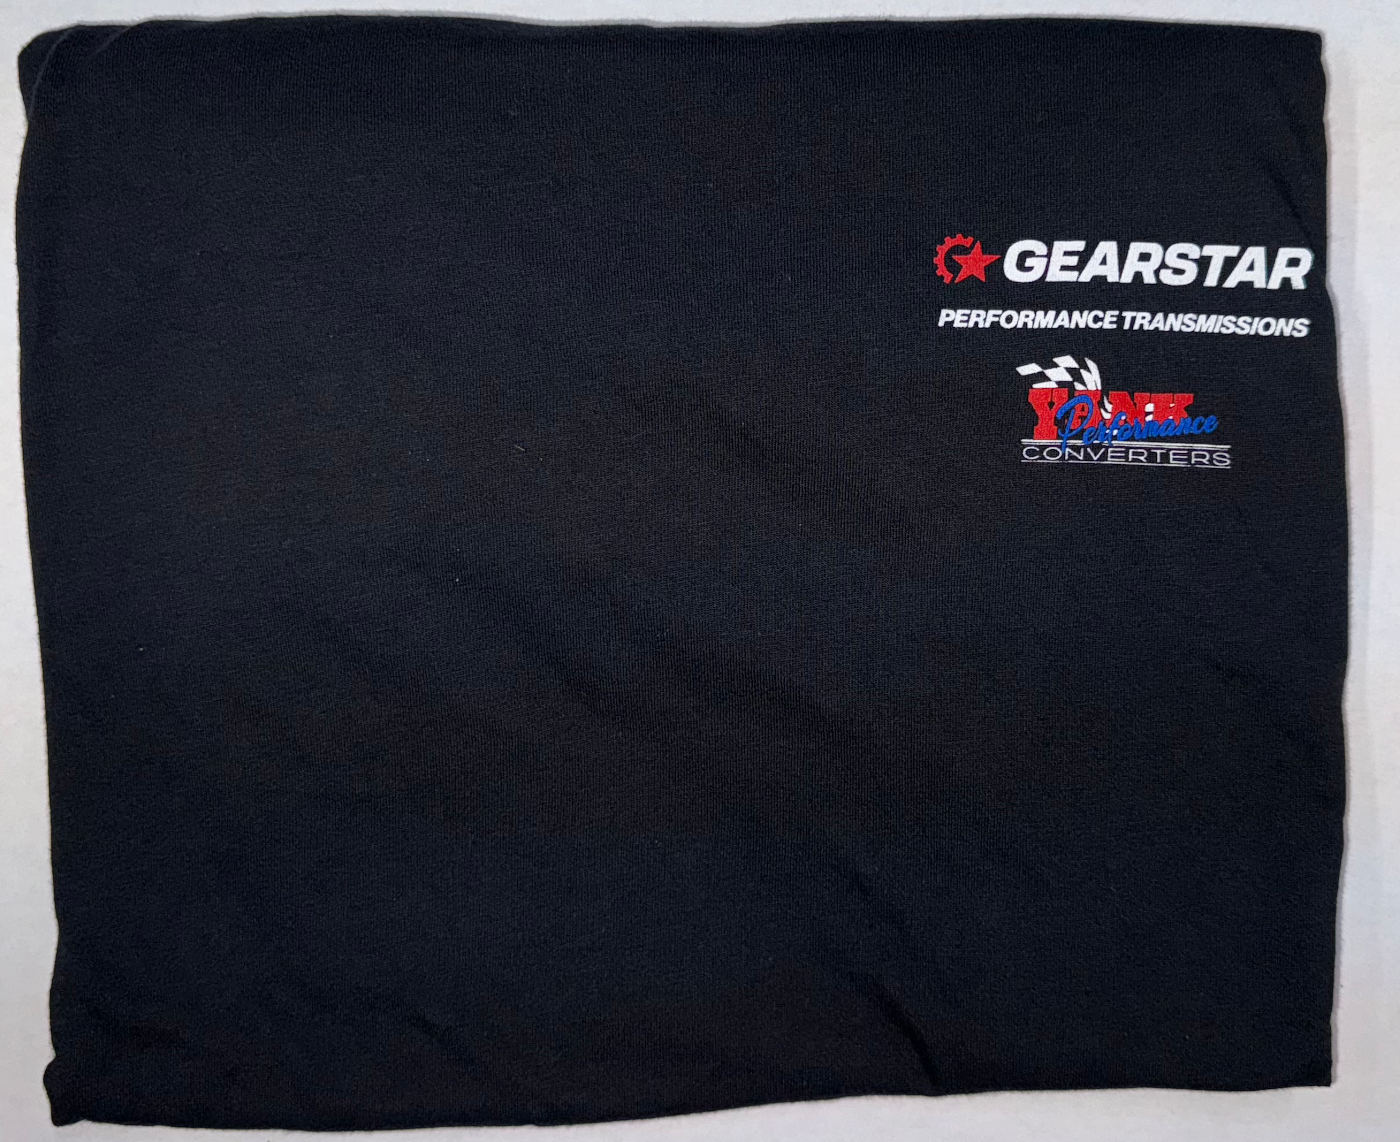 Black t-shirt with Gearstar logo on side chest